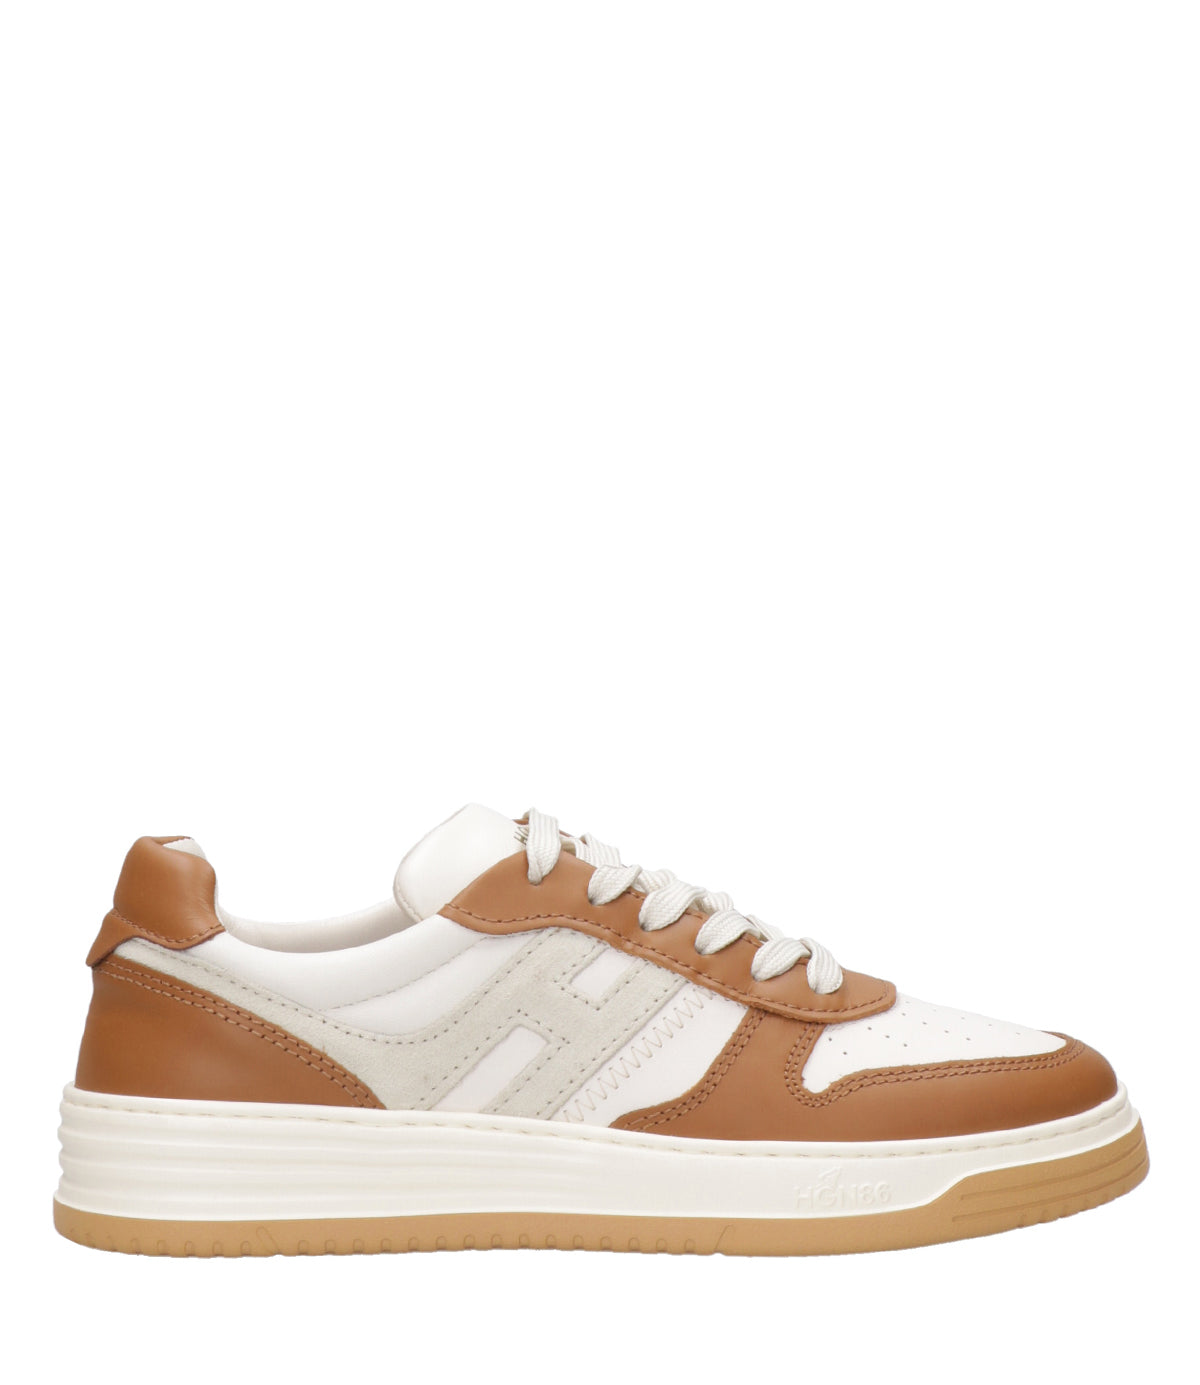 Hogan | Sneakers H630 White and Brown